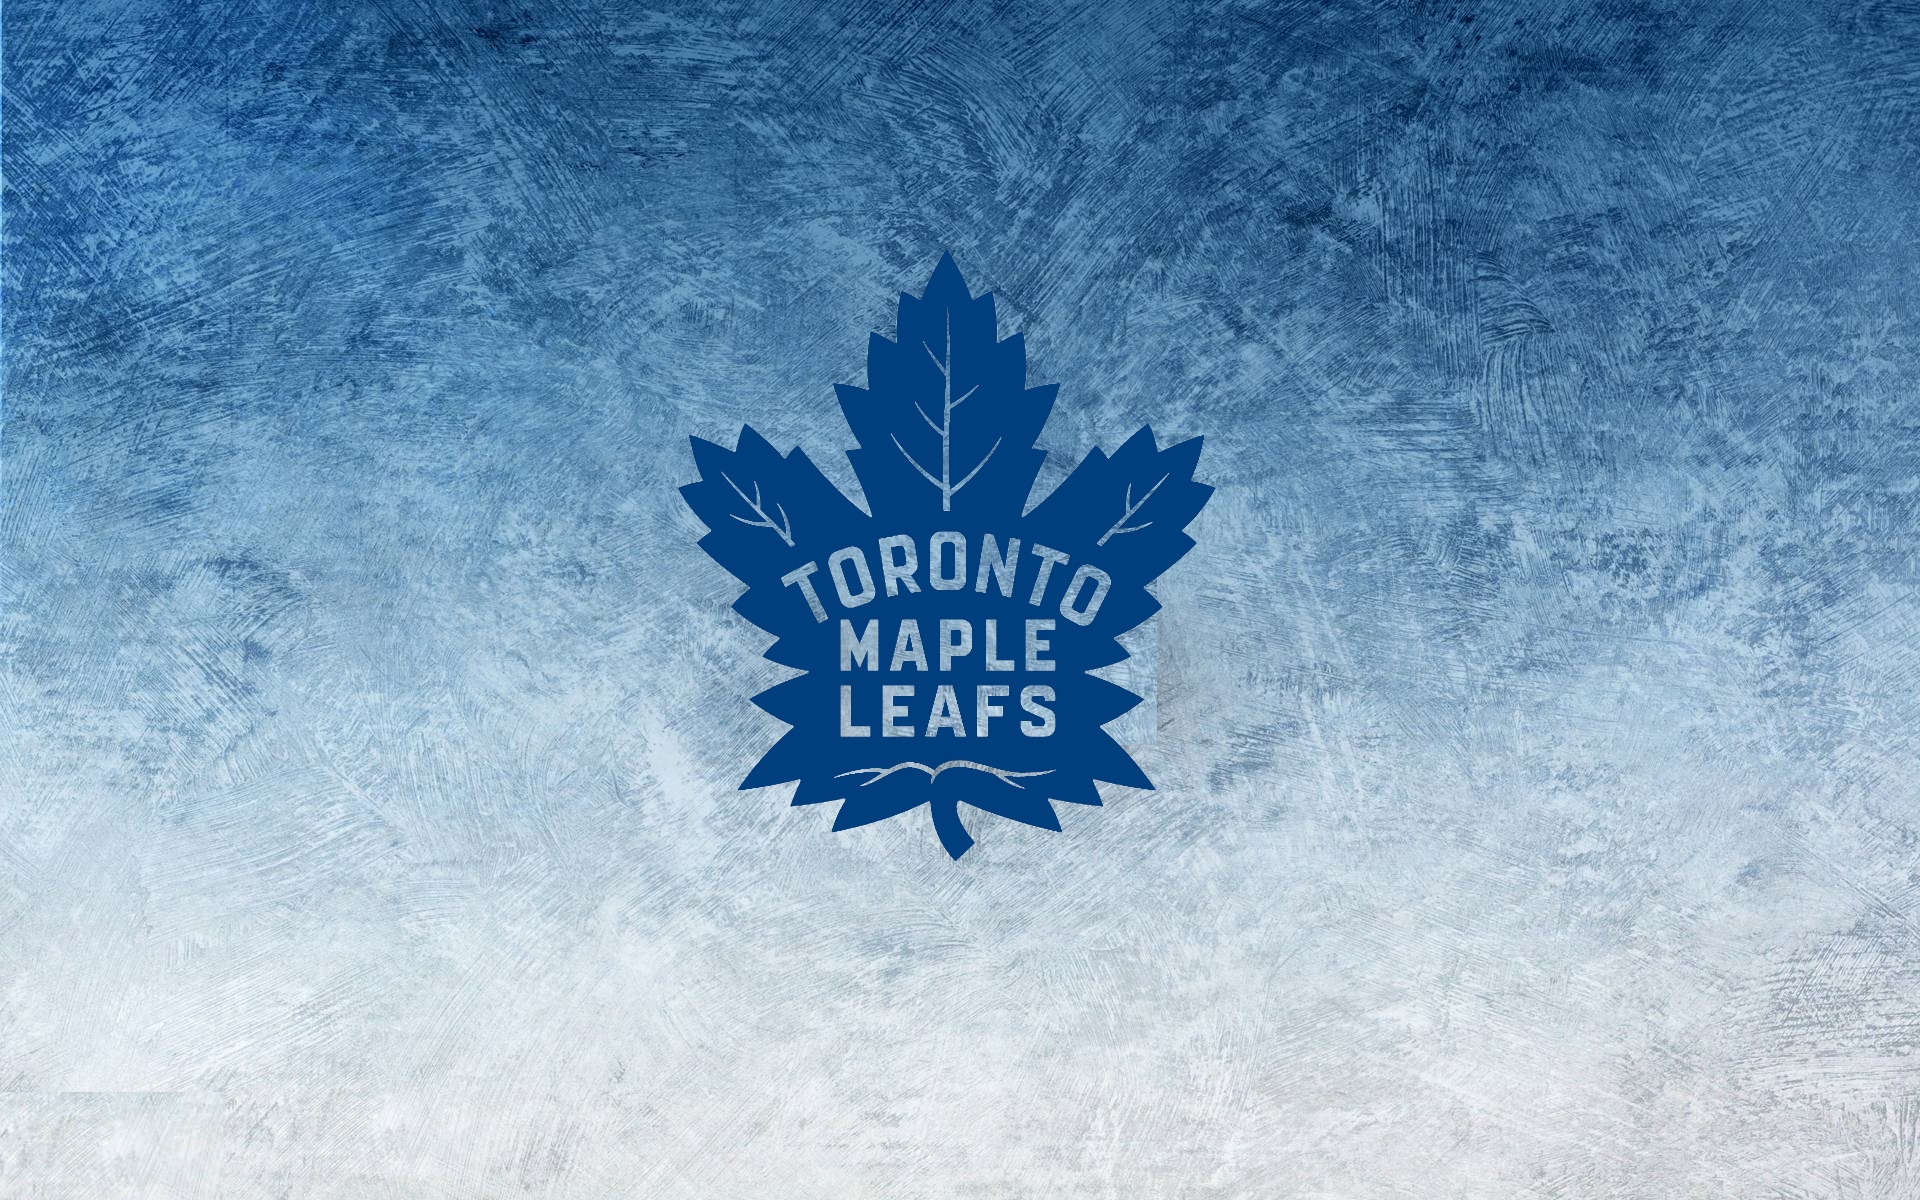 Toronto Maple Leafs HD Wallpaper Background Image